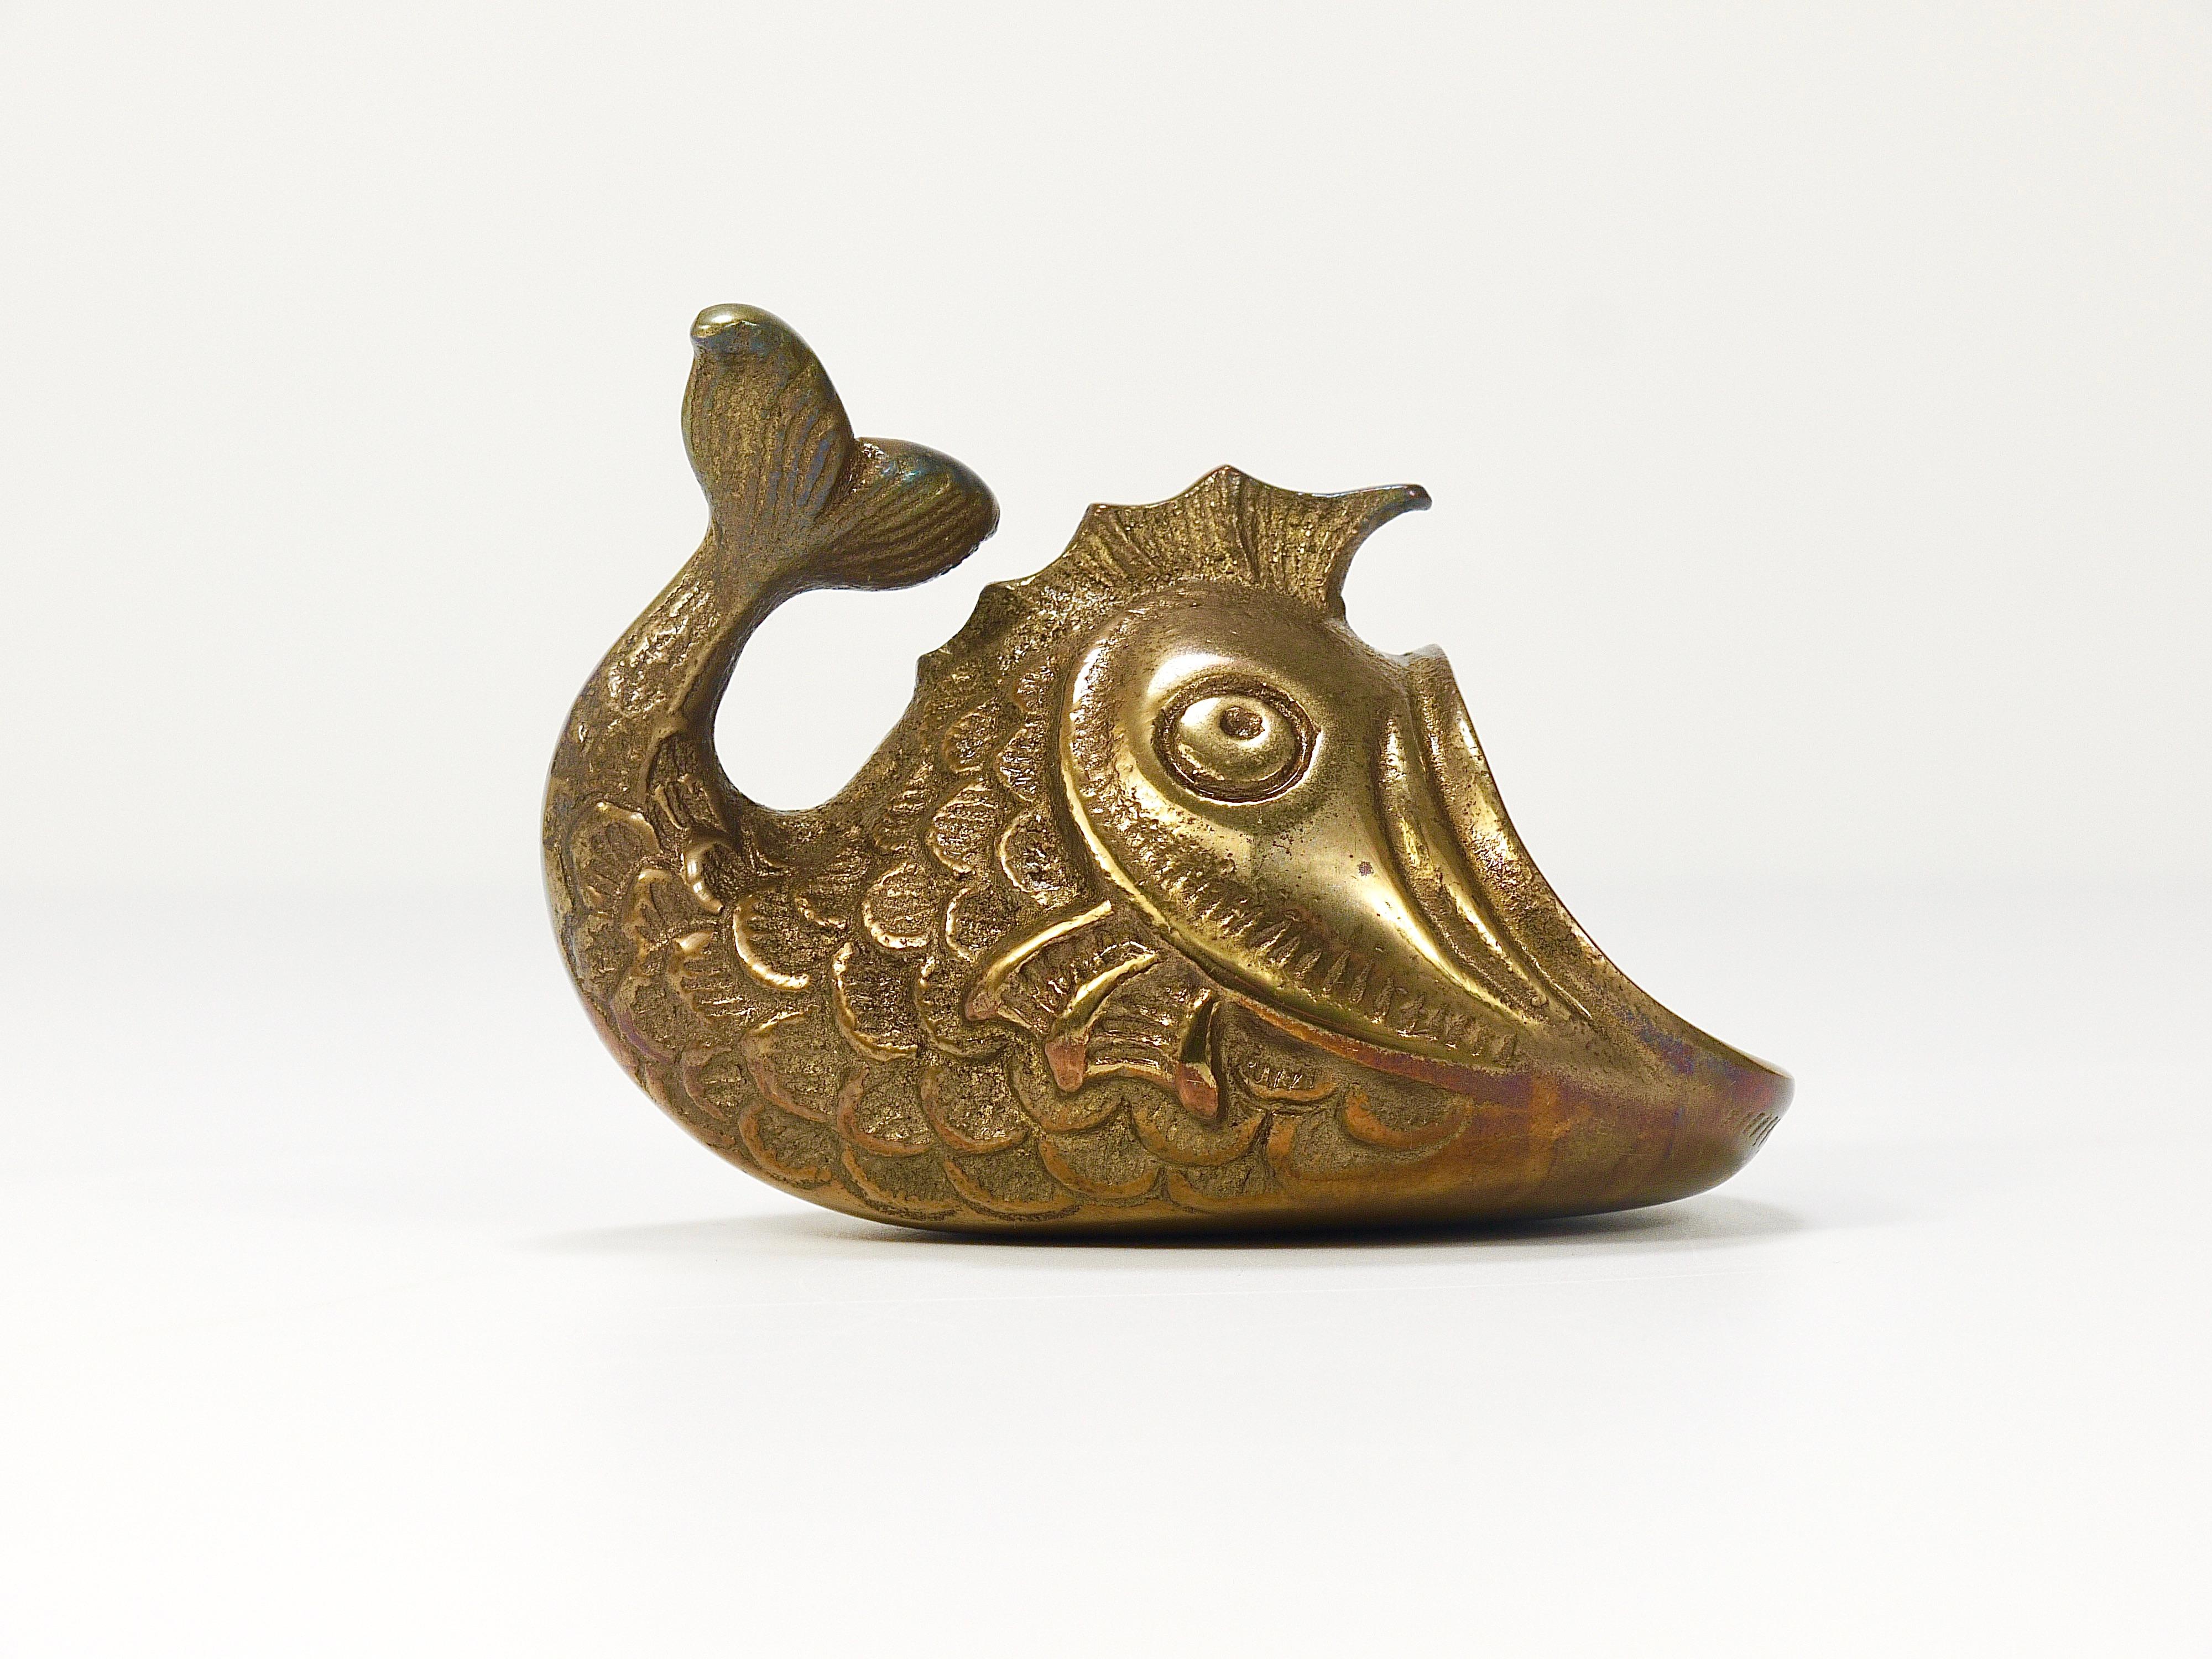 A charming Austrian midcentury brass ashtray from the 1950s, displaying a fish. A humorous design by Walter Bosse for Werkstätte Hagenauer Vienna. Made of solid brass. In good condition with marginal patina. A decorative attention-grabbing object.
